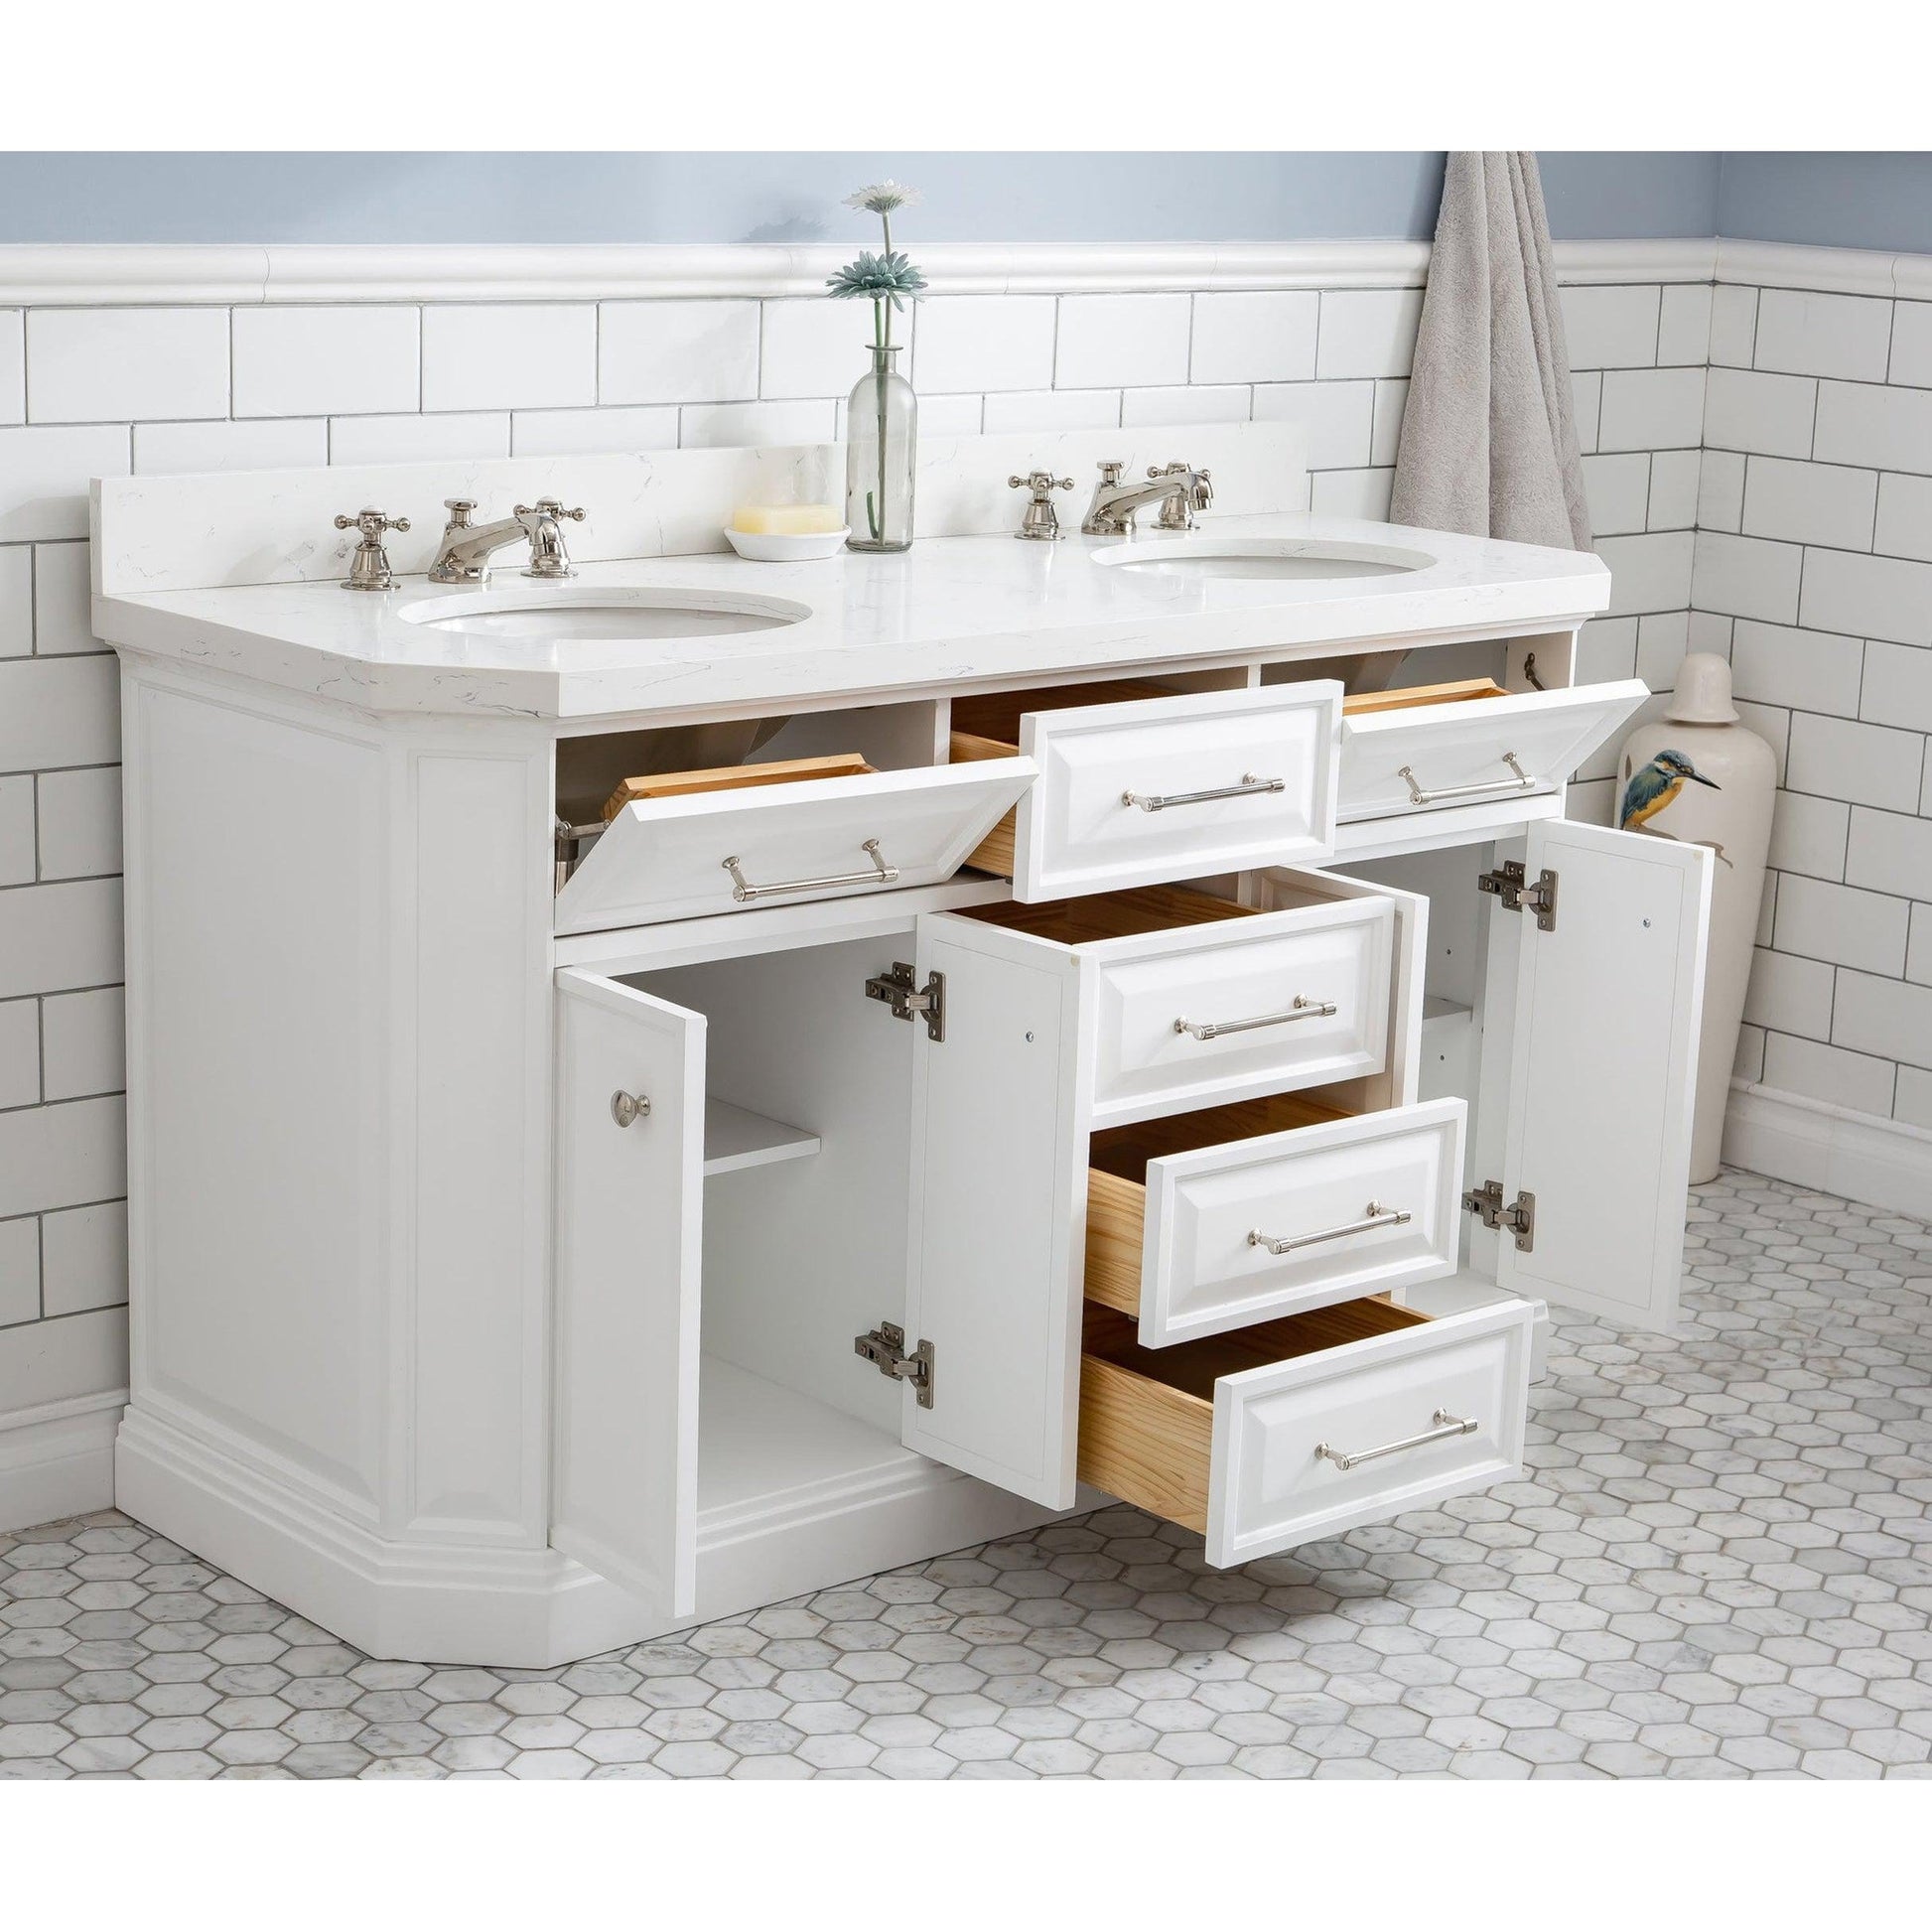 Water Creation Palace 60" Quartz Carrara Pure White Bathroom Vanity Set With Hardware in Polished Nickel (PVD) Finish